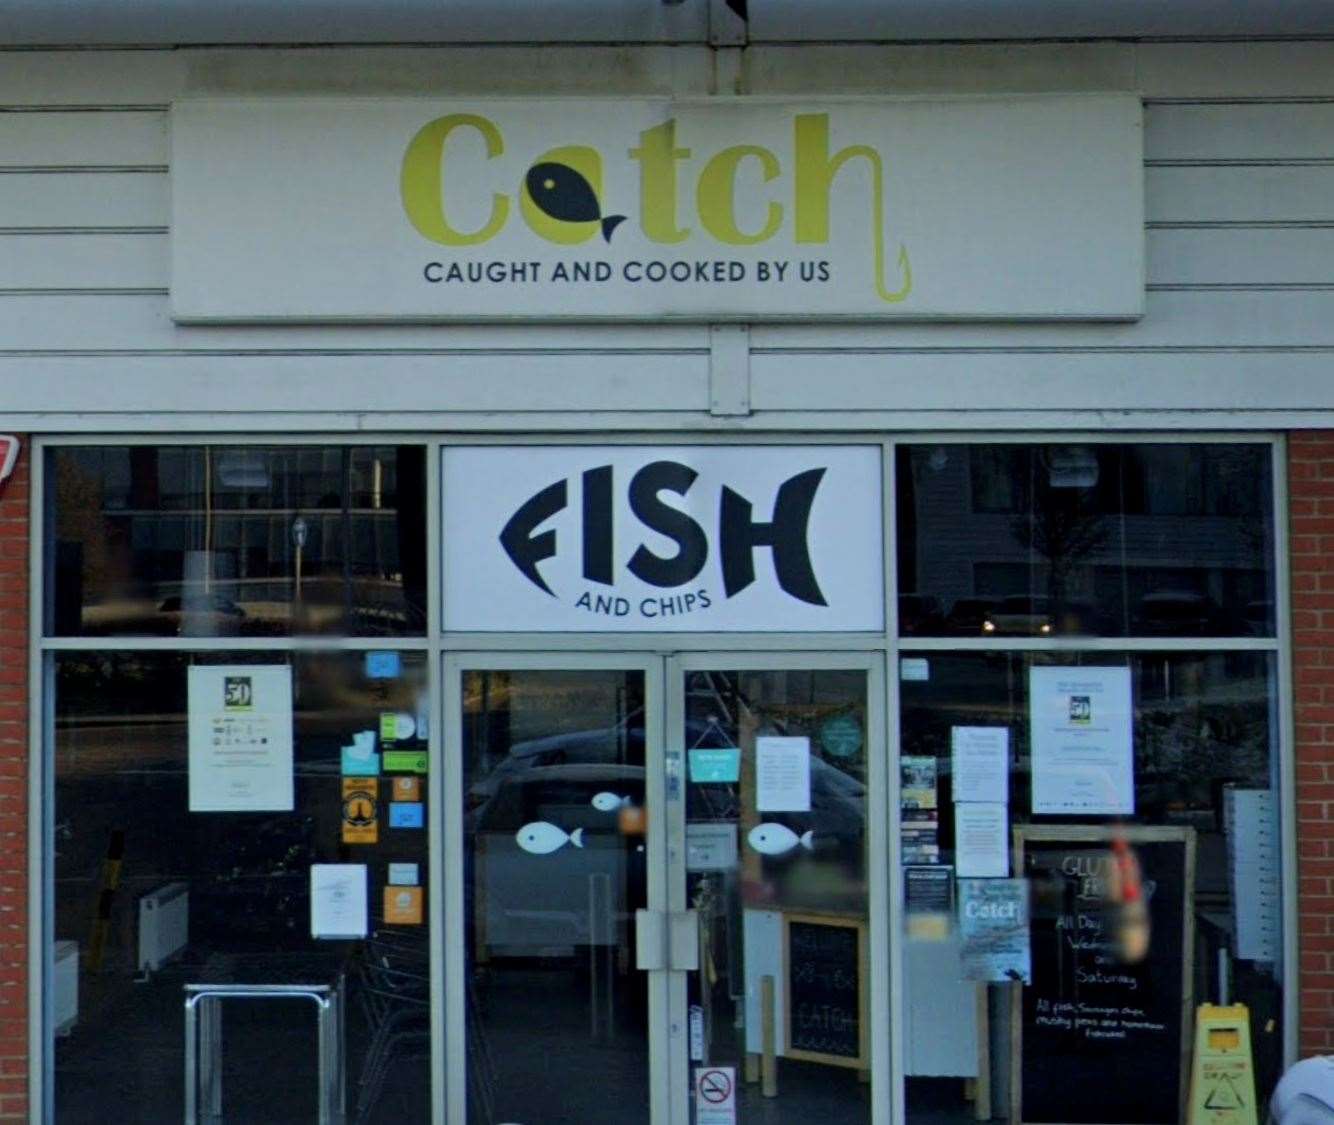 Catch in Ashford also scored a place on the awards